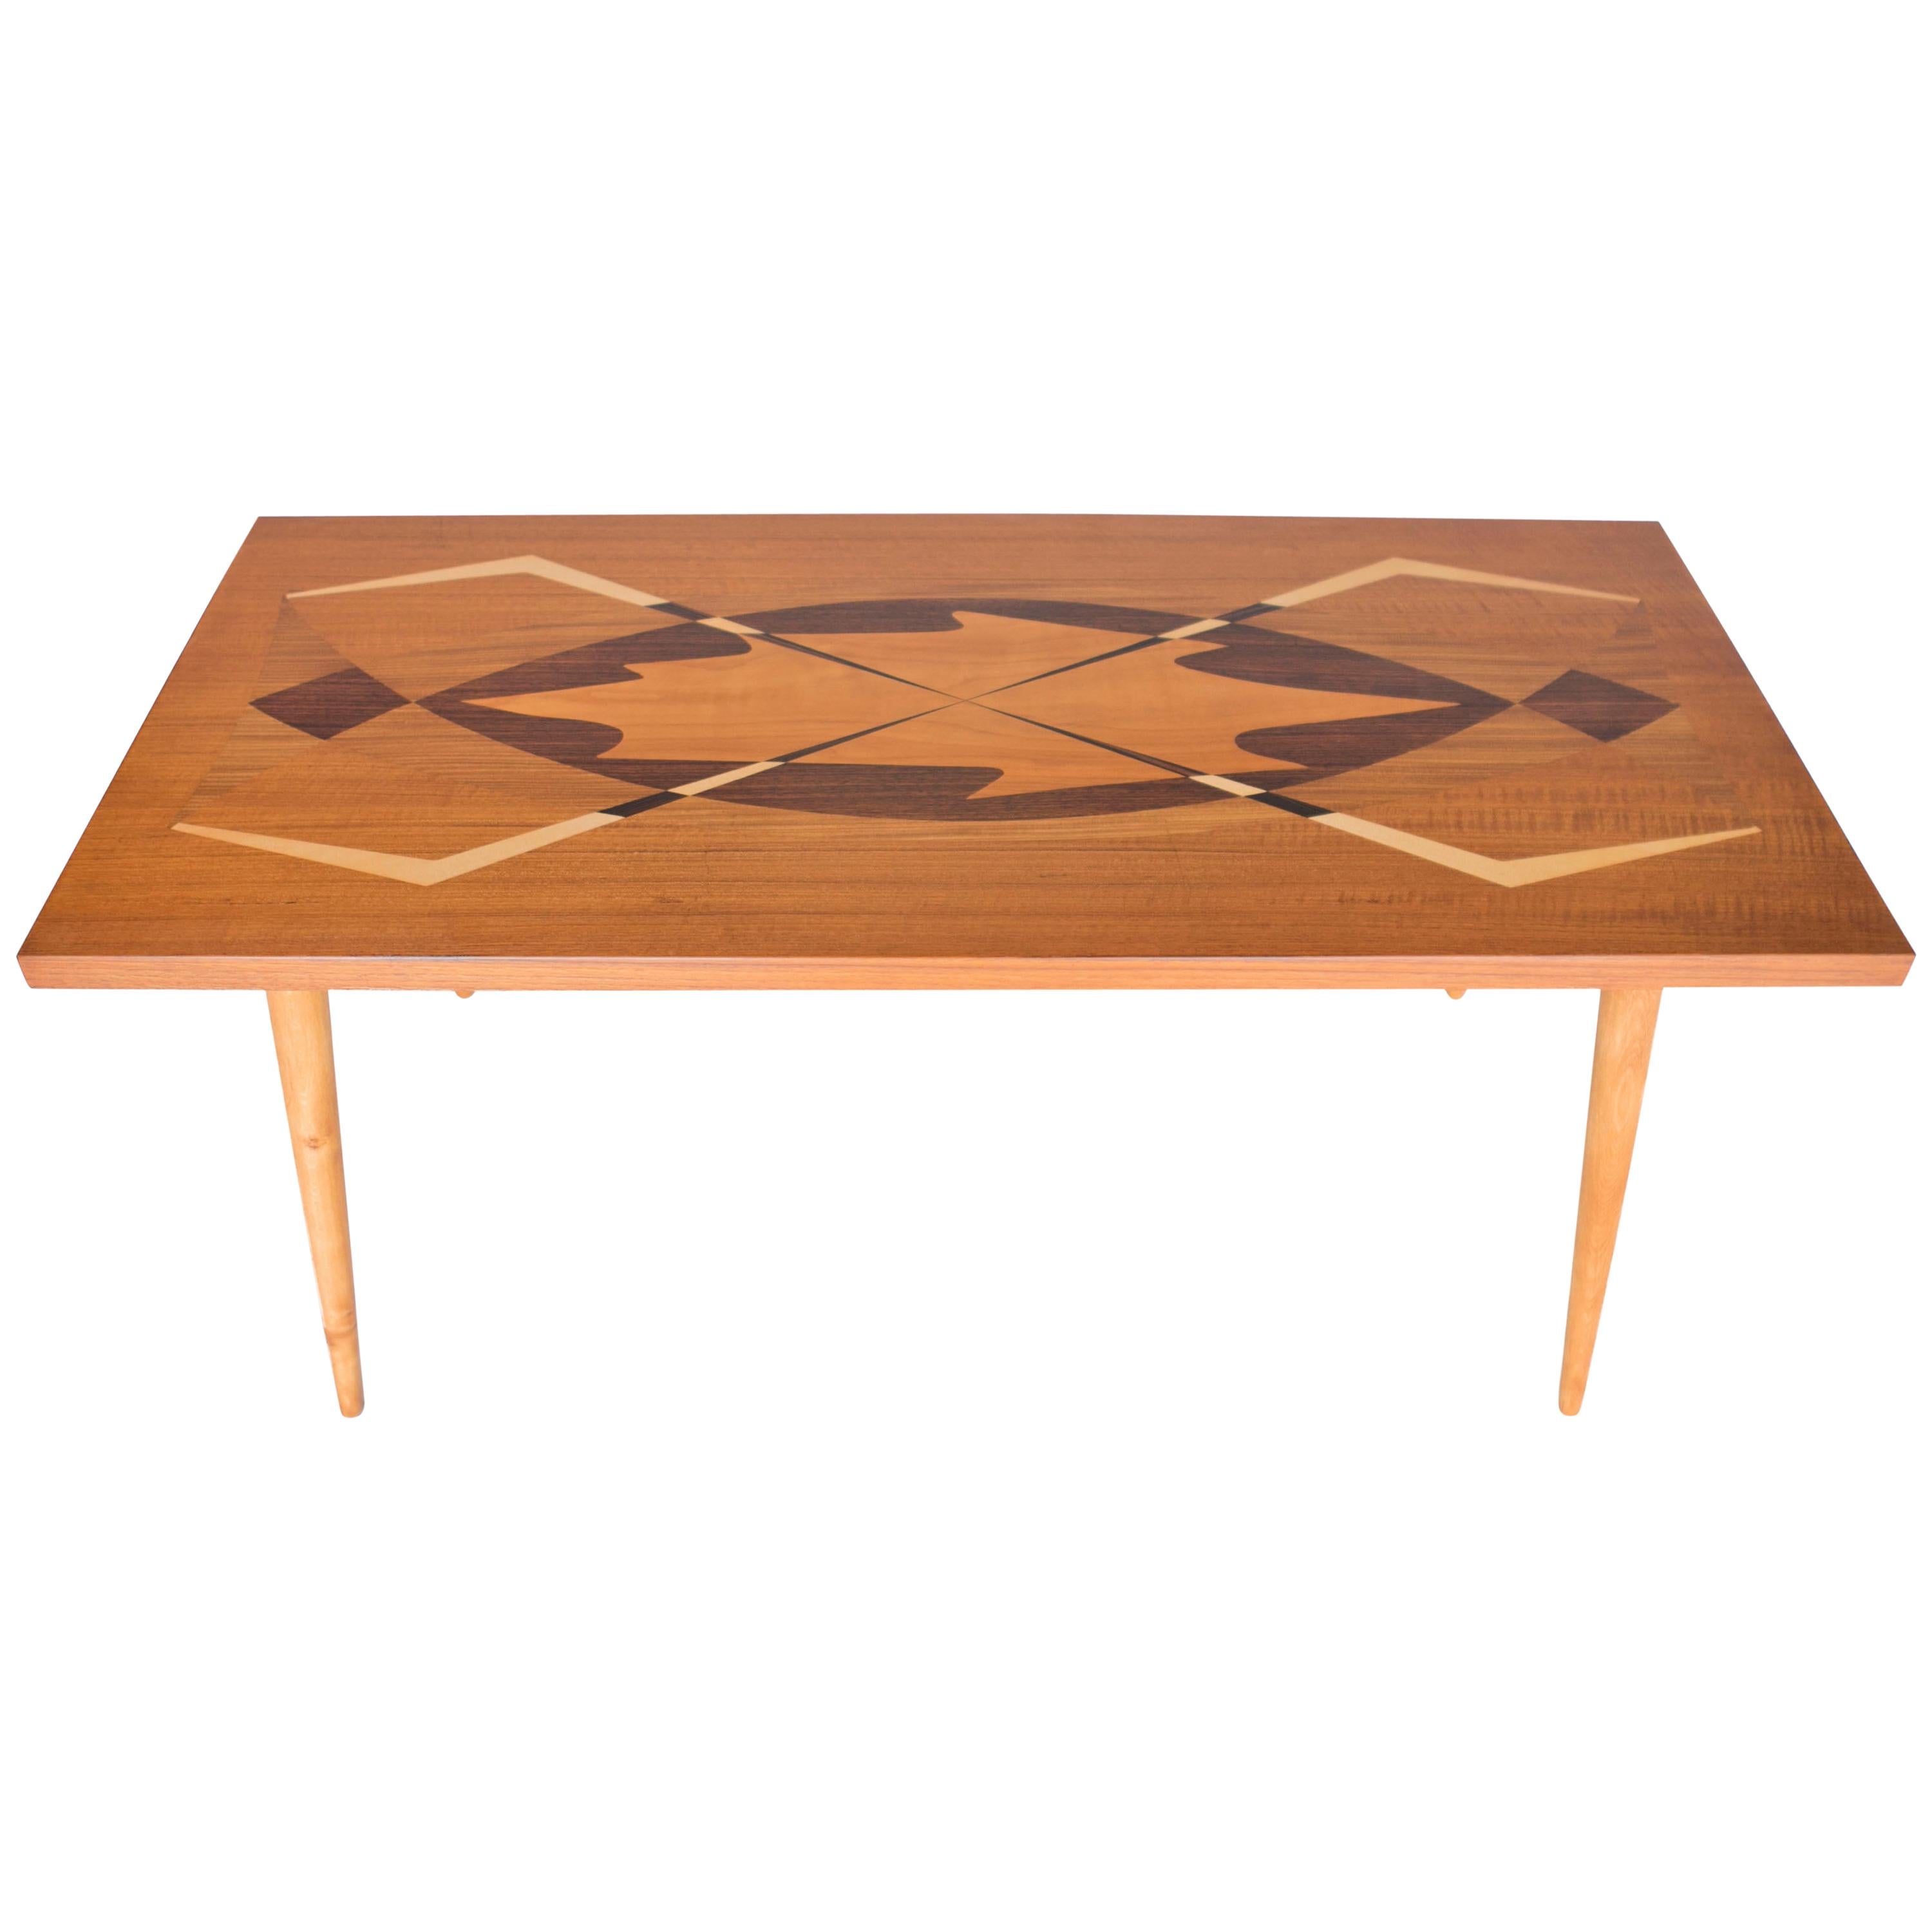 Swedish Modern Coffee Table with Exotic Wood Inlay, Sweden, 1950s For Sale